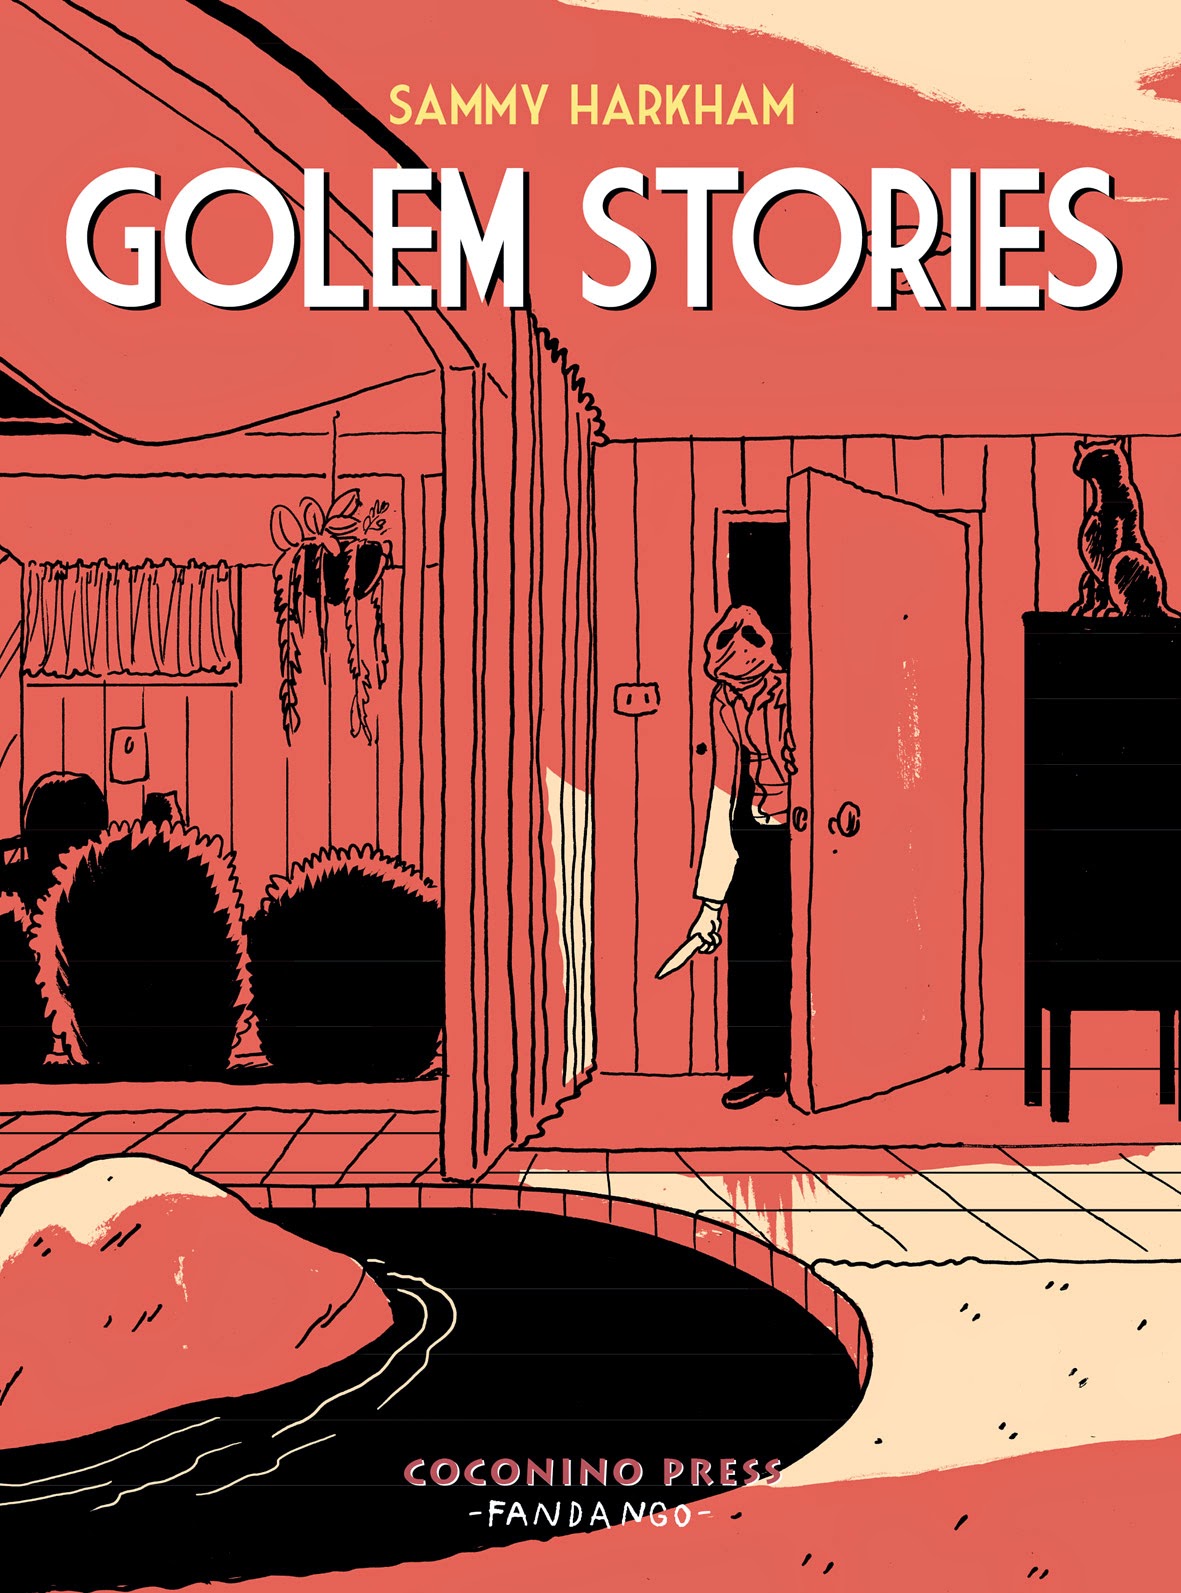 Golem stories Book Cover